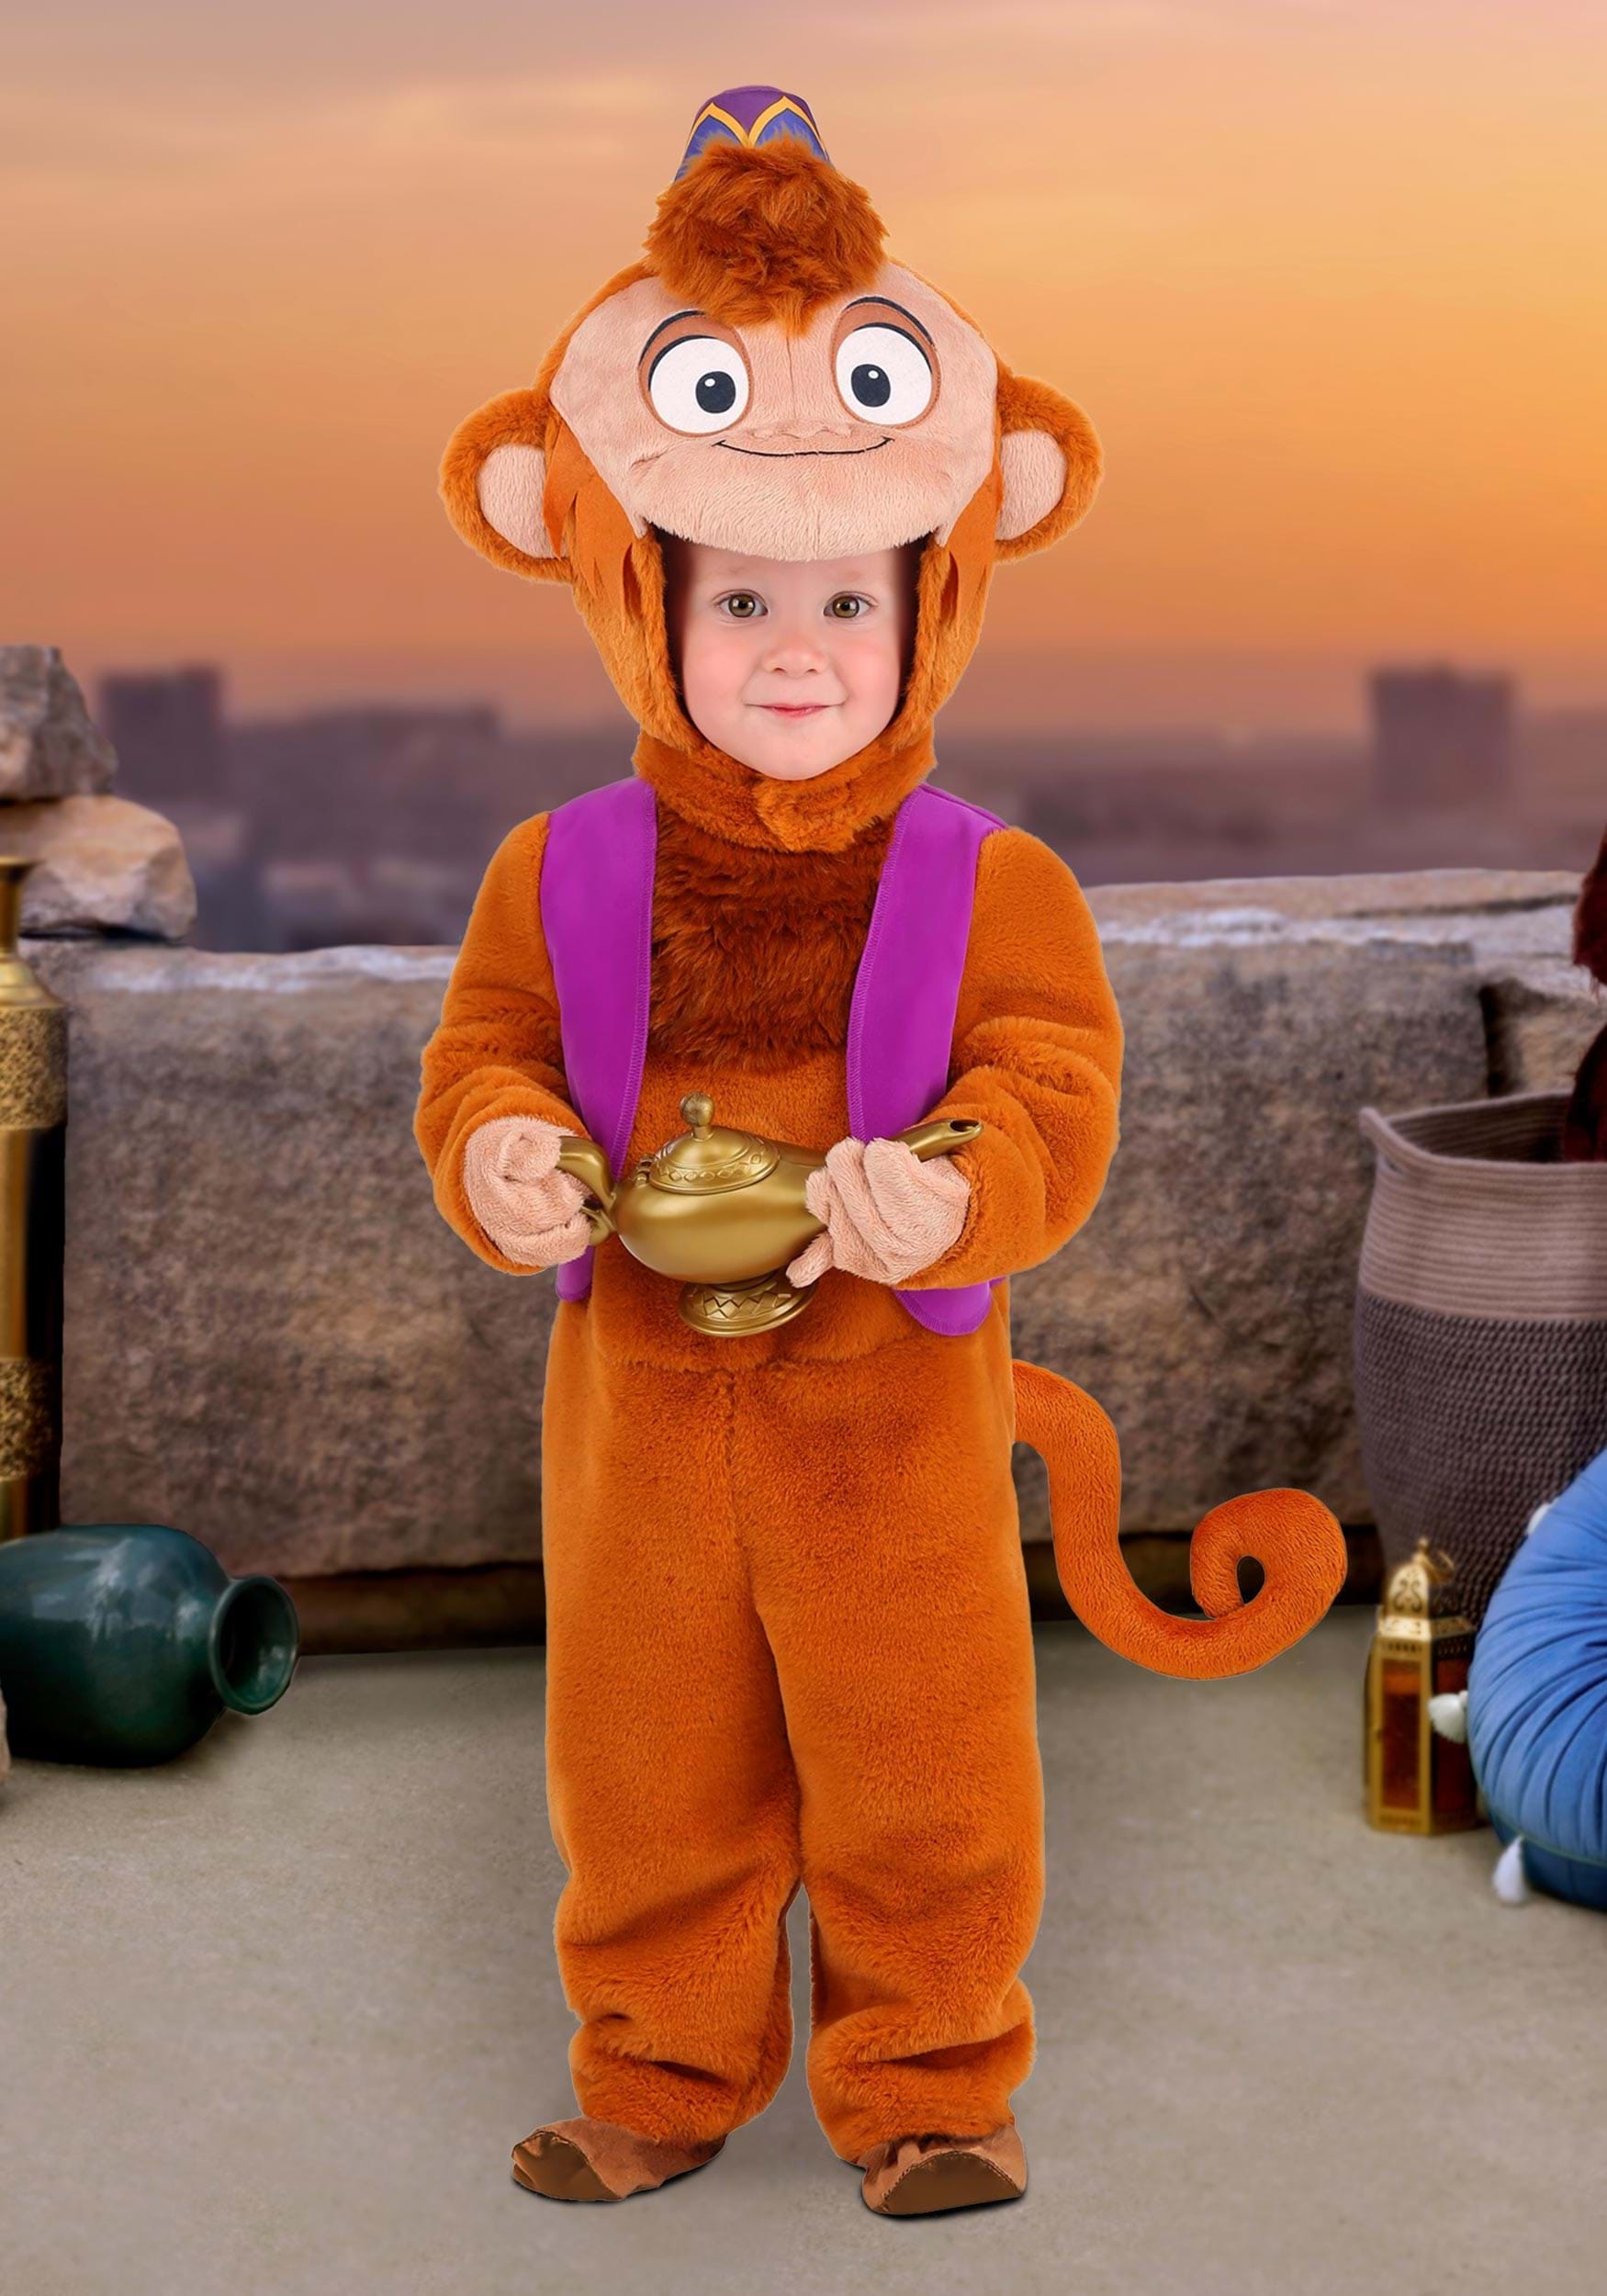 https://images.halloweencostumes.ca/products/62872/1-1/aladdin-toddler-abu-deluxe-costume.jpg